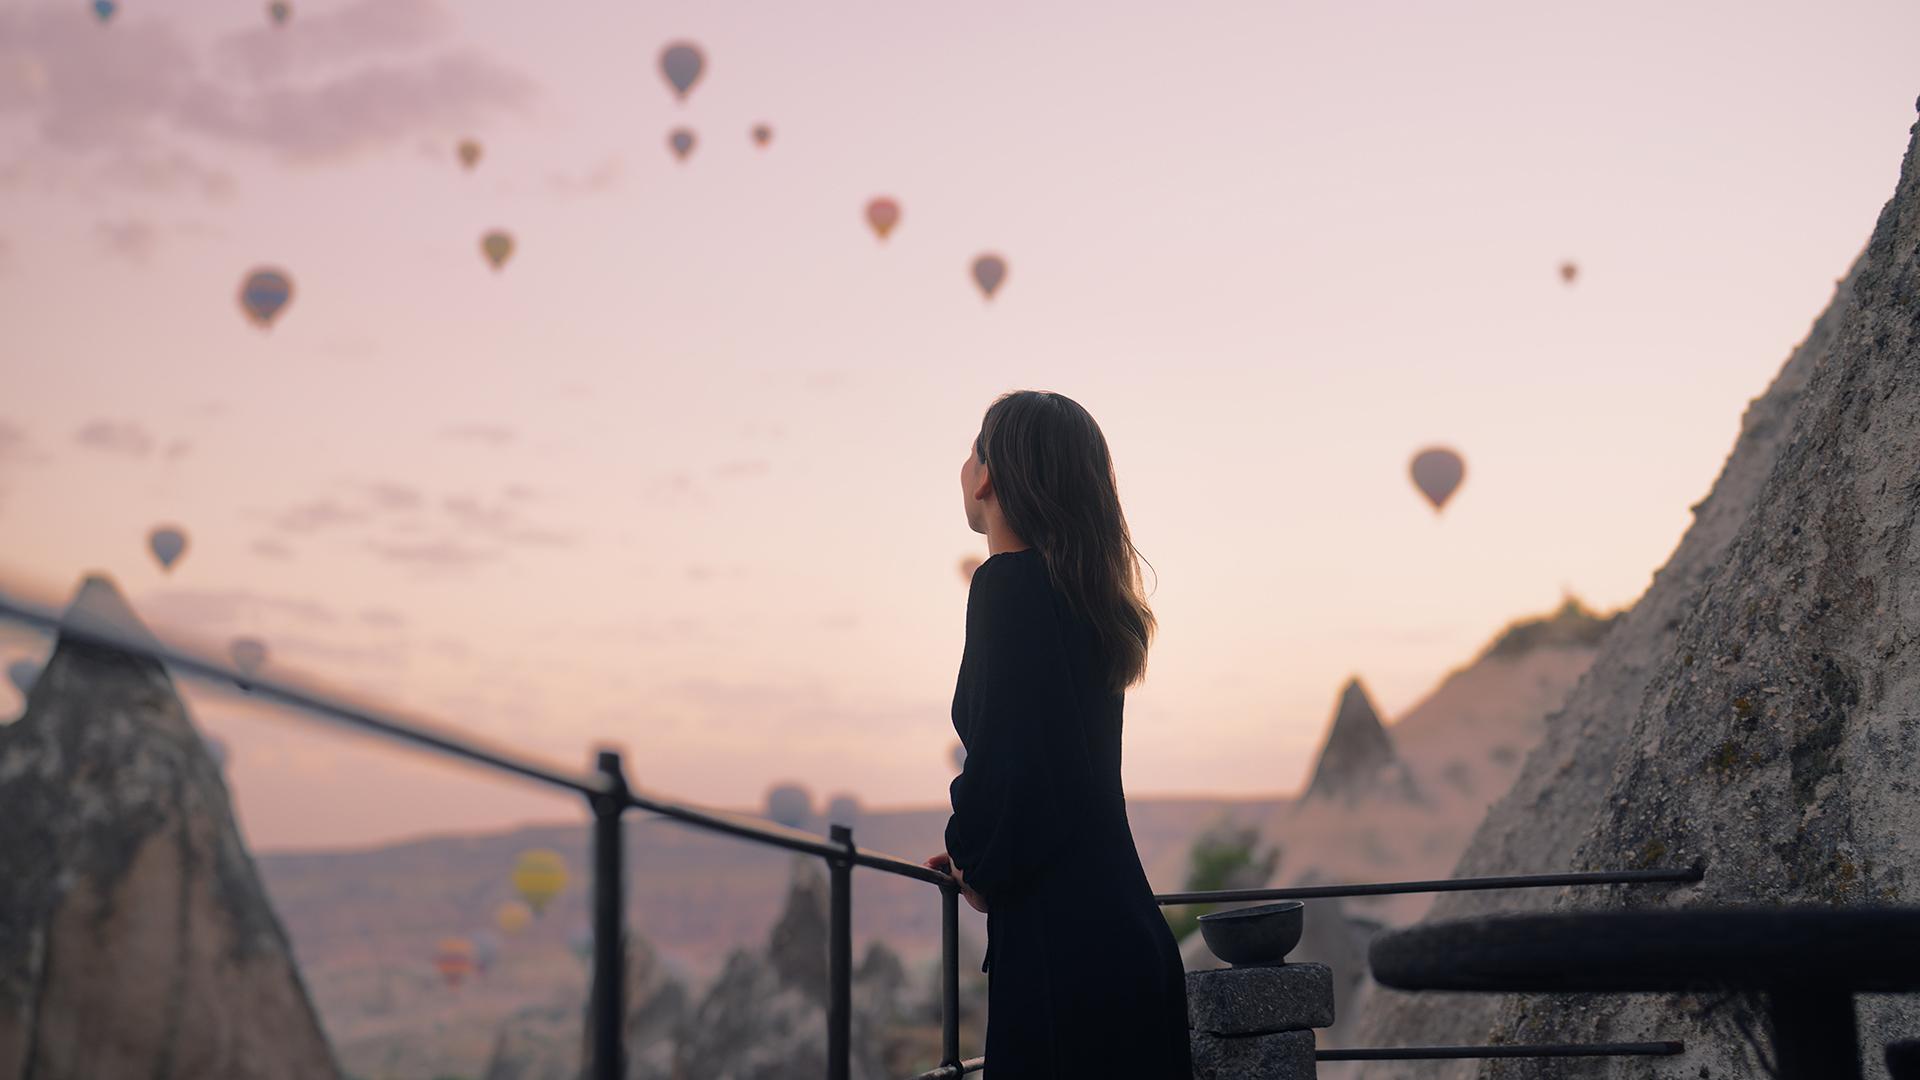 A female tourist is enjoying watching hot air balloons flying in the sky at the rooftop of the hotel where she is staying during her vacation.